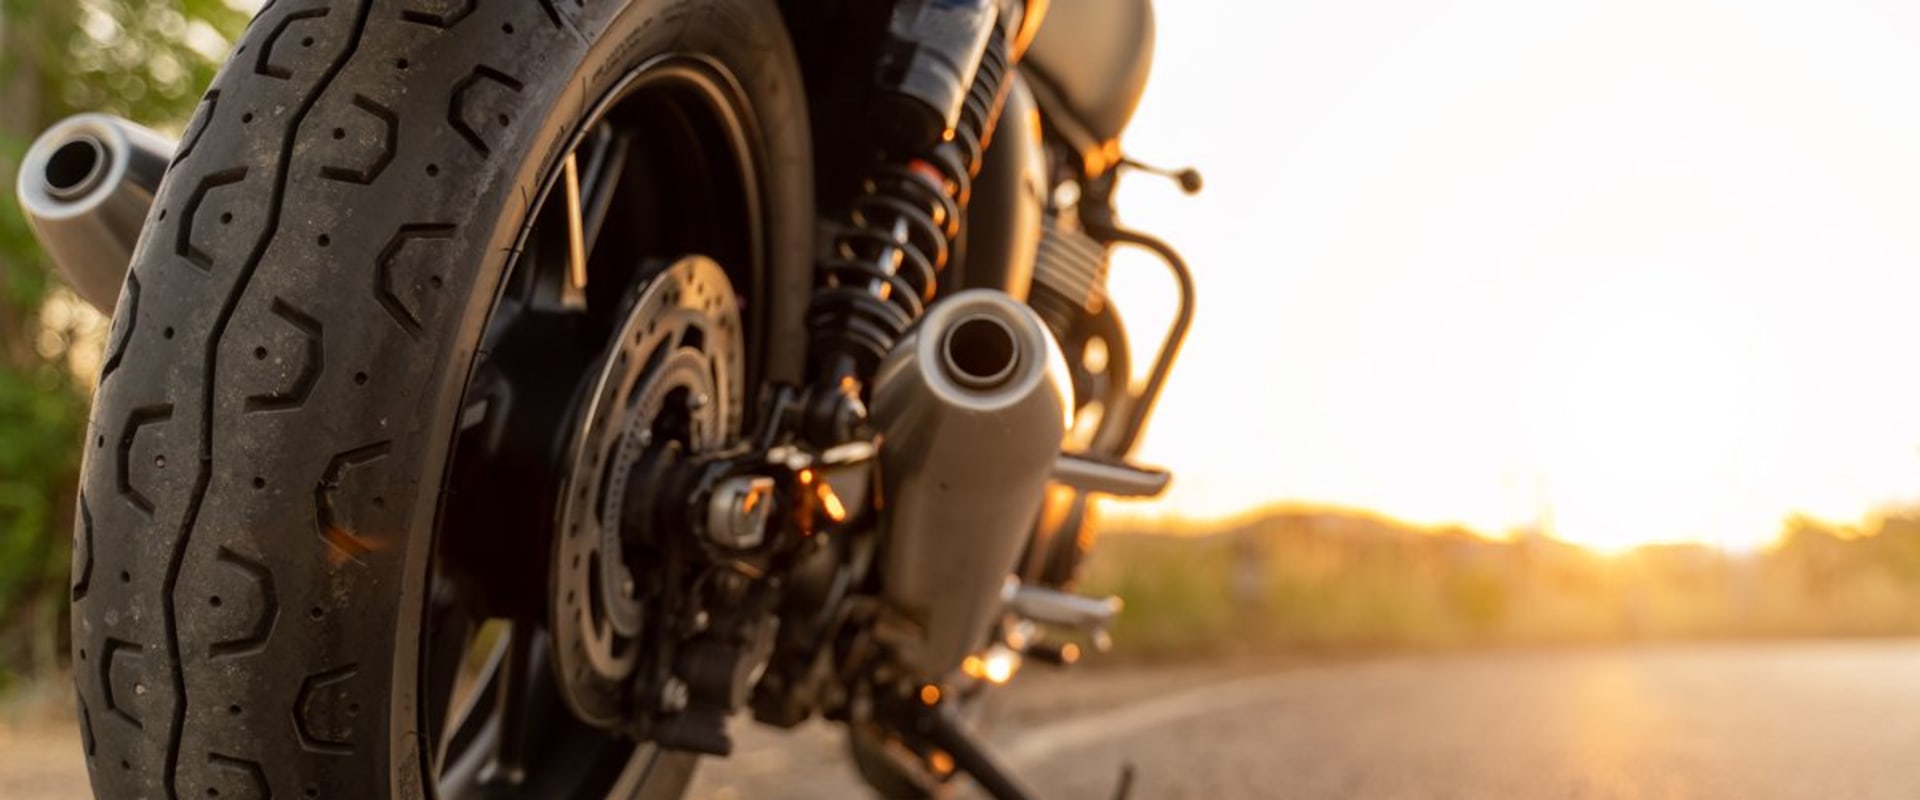 Motorcycle Insurance for an Autocycle in Florida